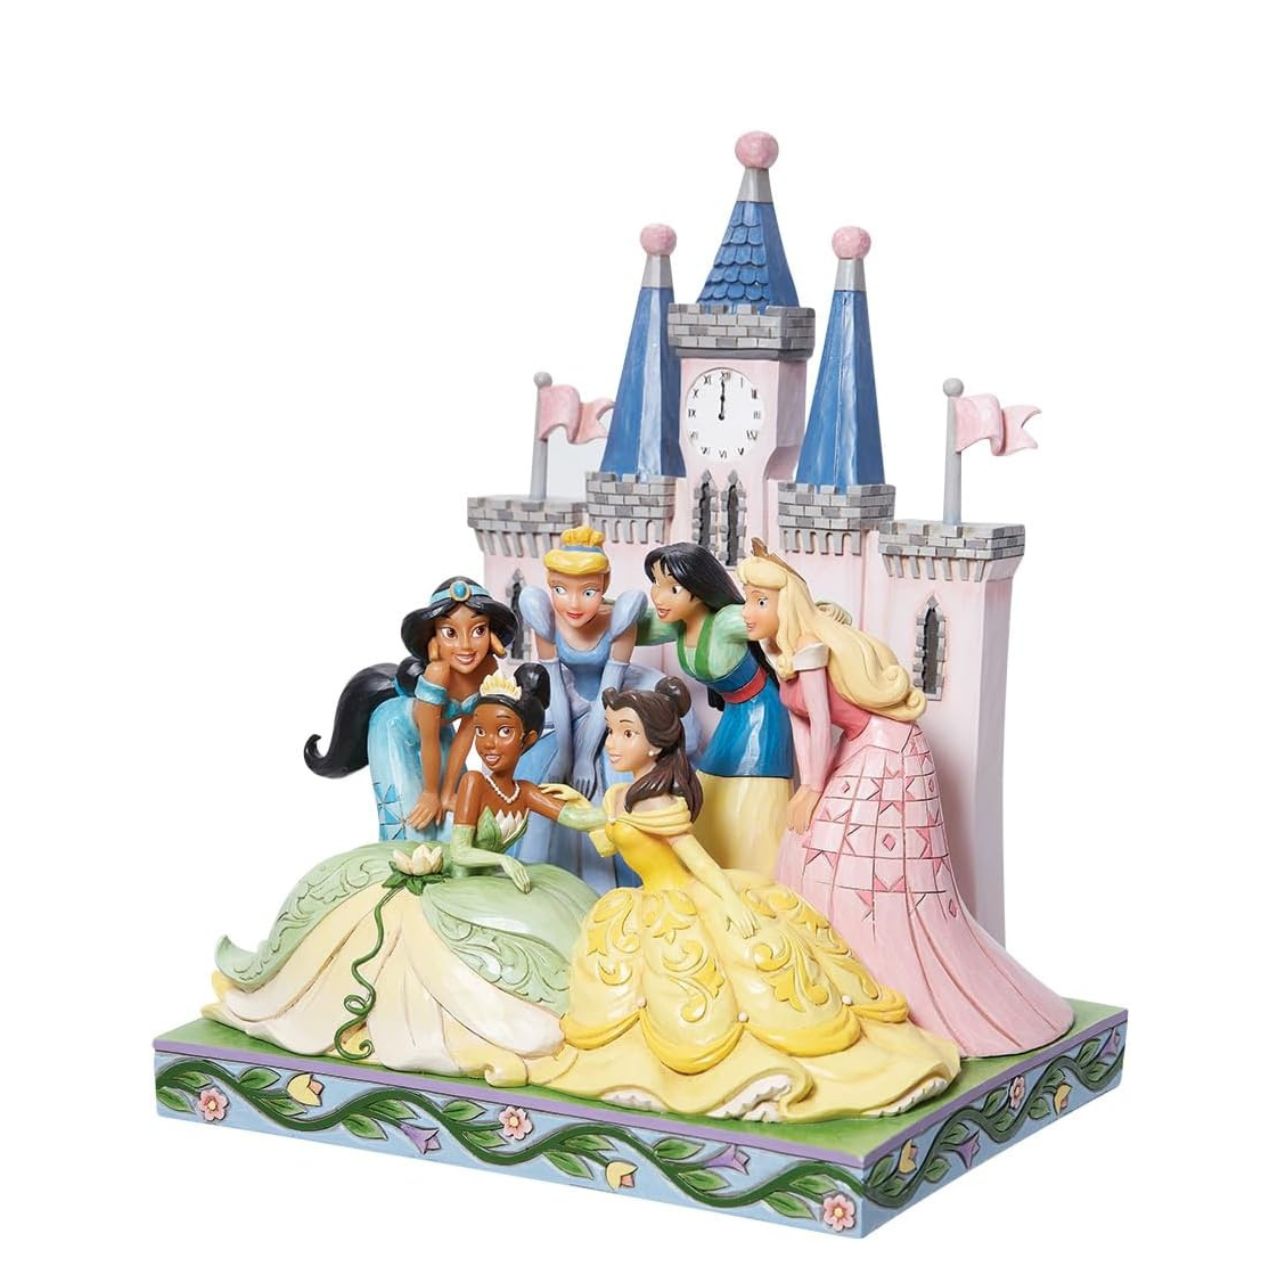 Featuring beloved Disney Princesses such as Jasmine, Belle, Tiana, Cinderella, Mulan and Aurora, this is the perfect gift for any super-fan. Designed by award winning artist Jim Shore, hand crafted using high quality cast stone and hand painted.